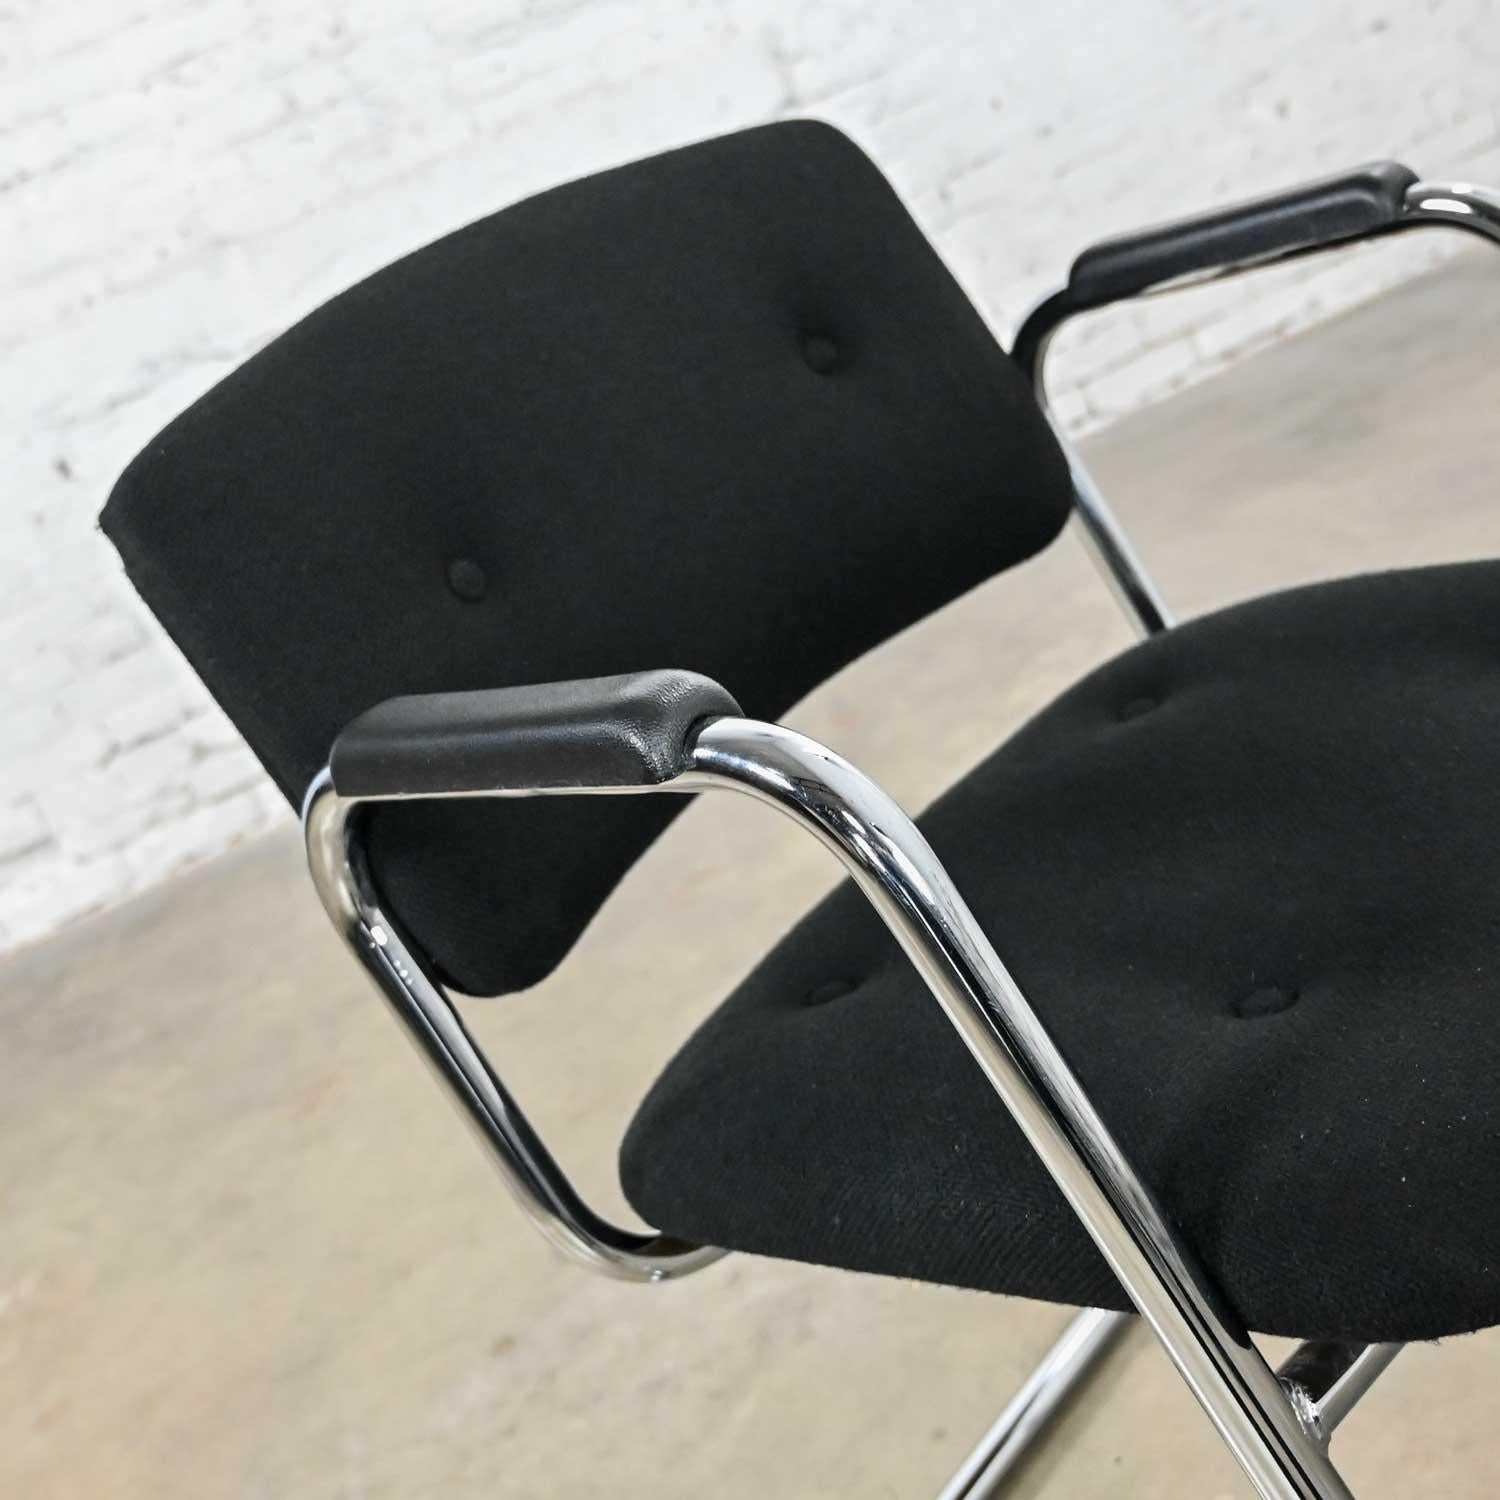 Vintage Modern Black & Chrome Cantilever Chair by United Chair Co Style of Steel For Sale 3